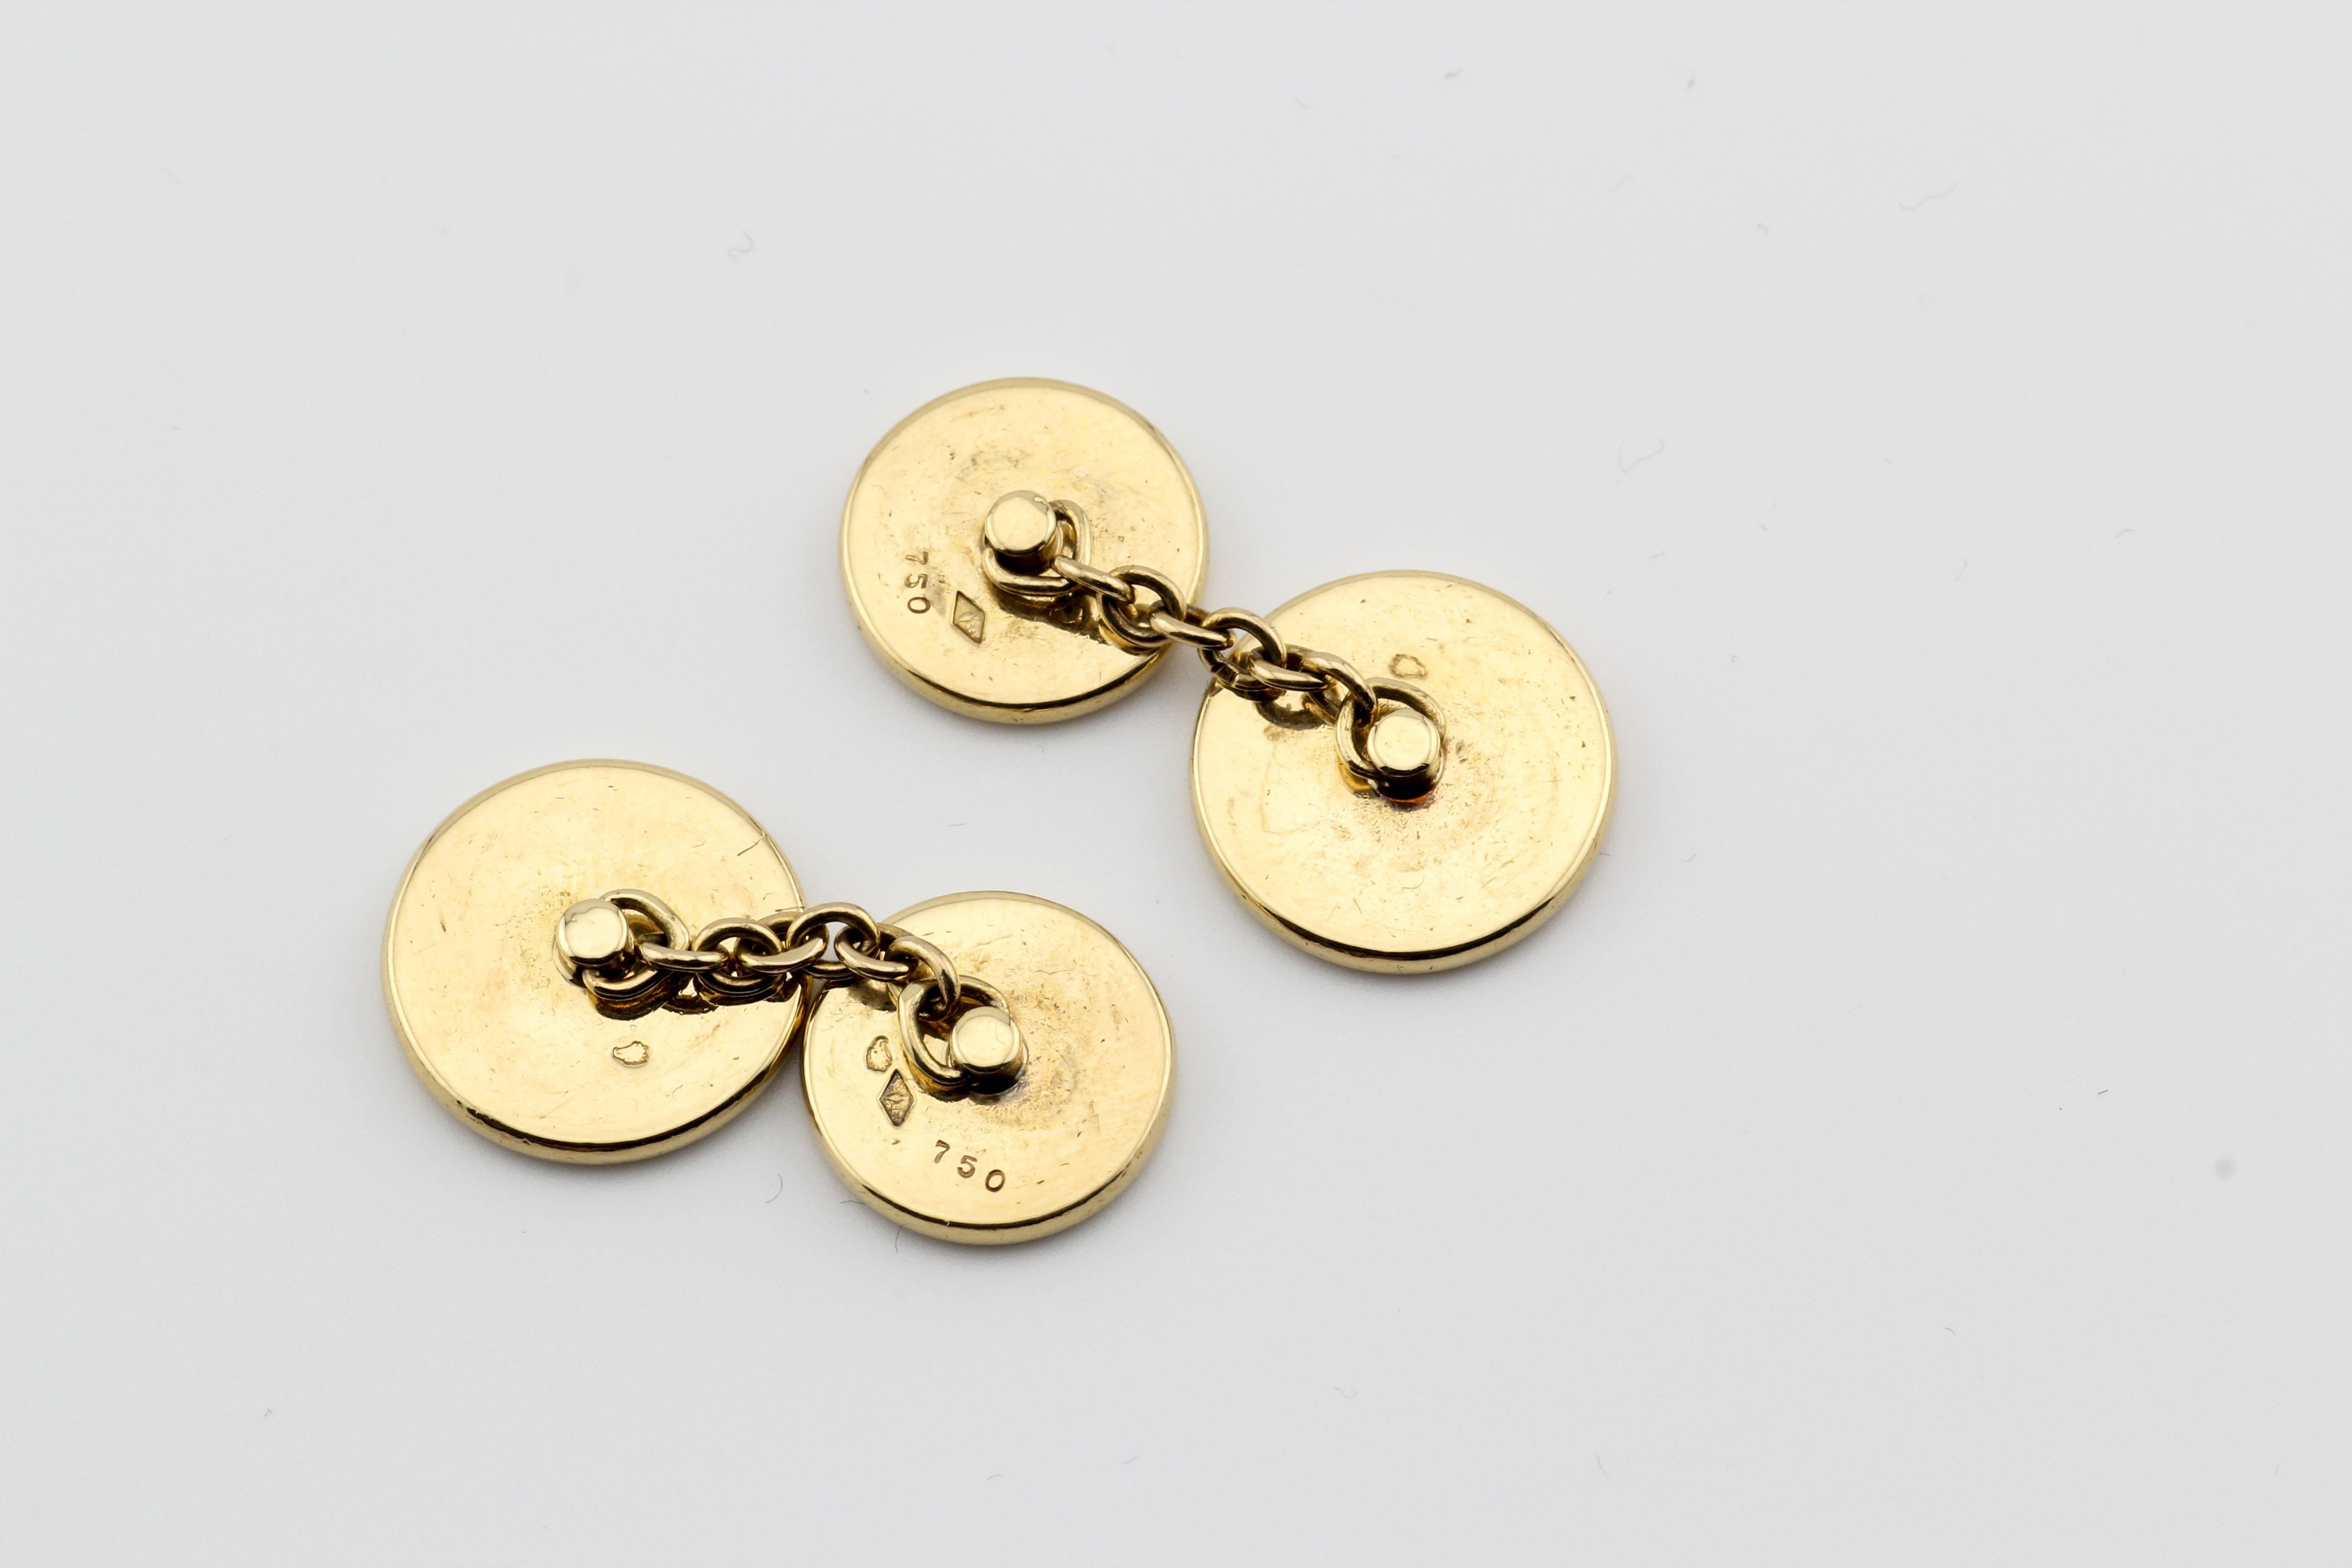 Hermes Clou De Selle 18K Gold Disc Cufflinks In Good Condition For Sale In Bellmore, NY